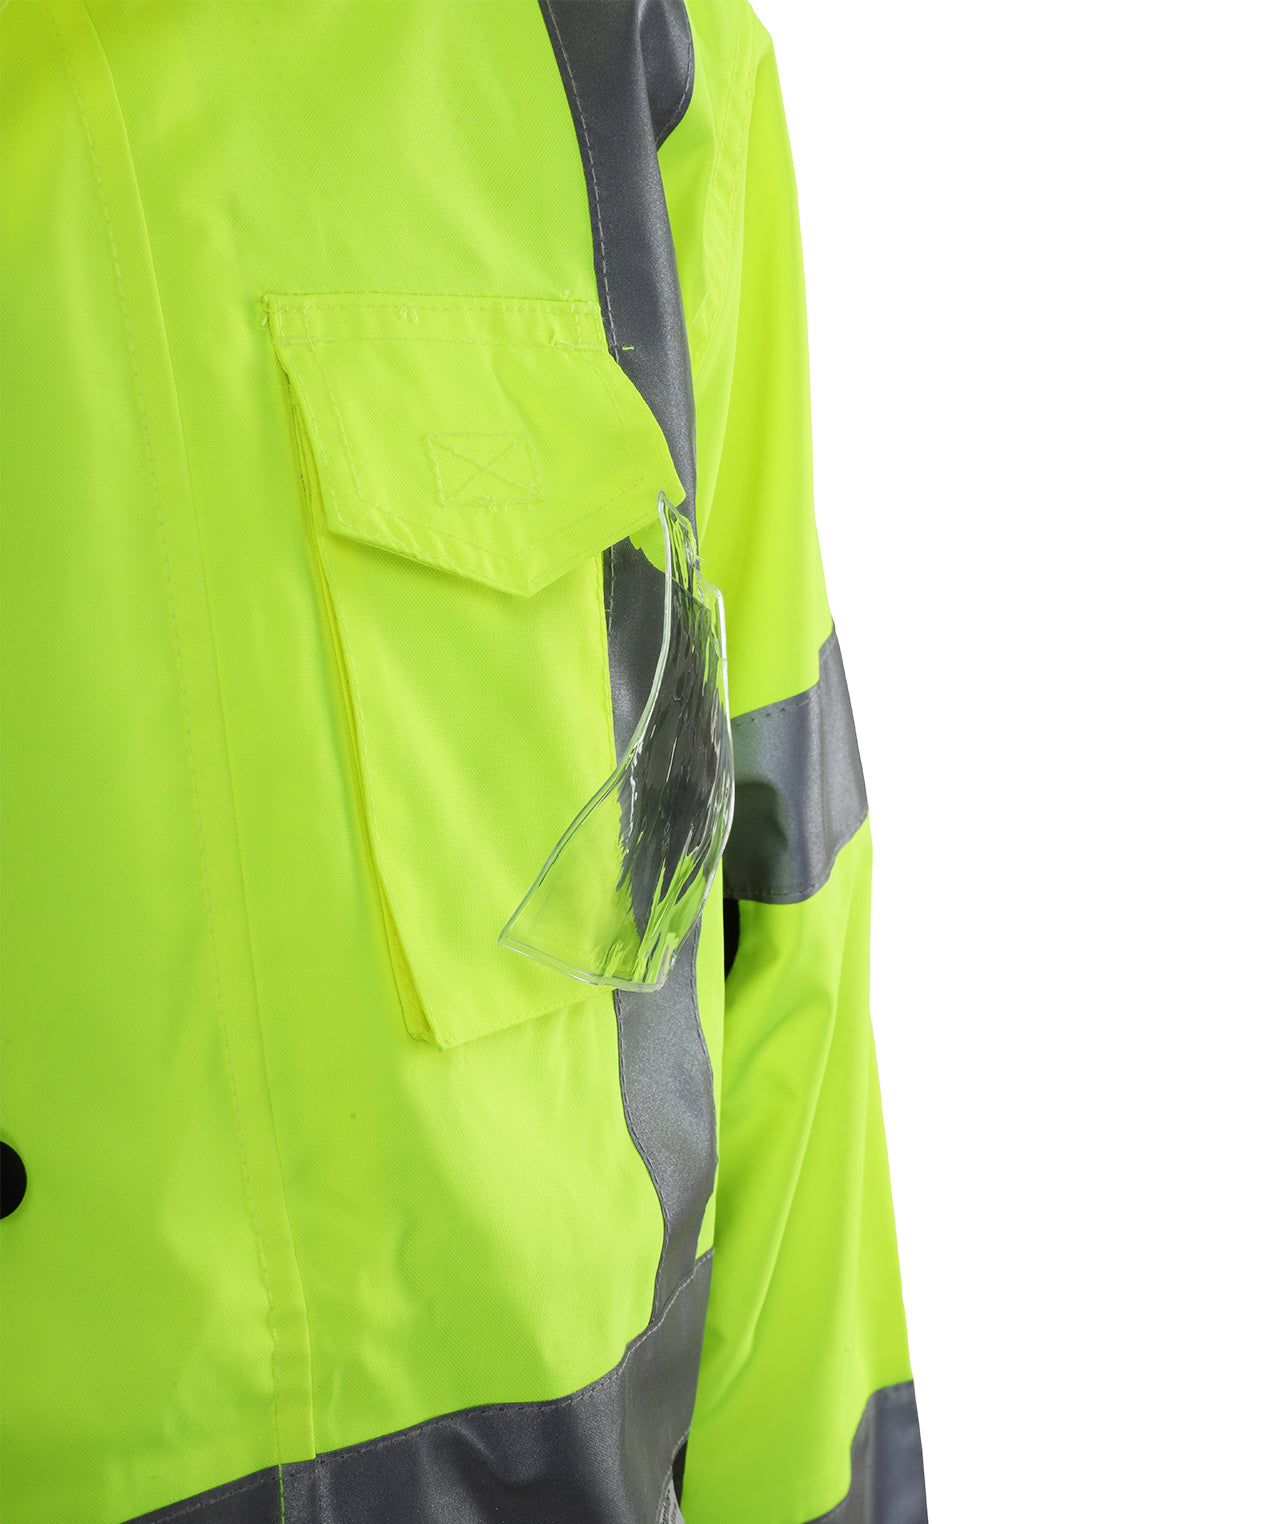 Fluorescent yellow workwear – MASCOT's products in hi-vis